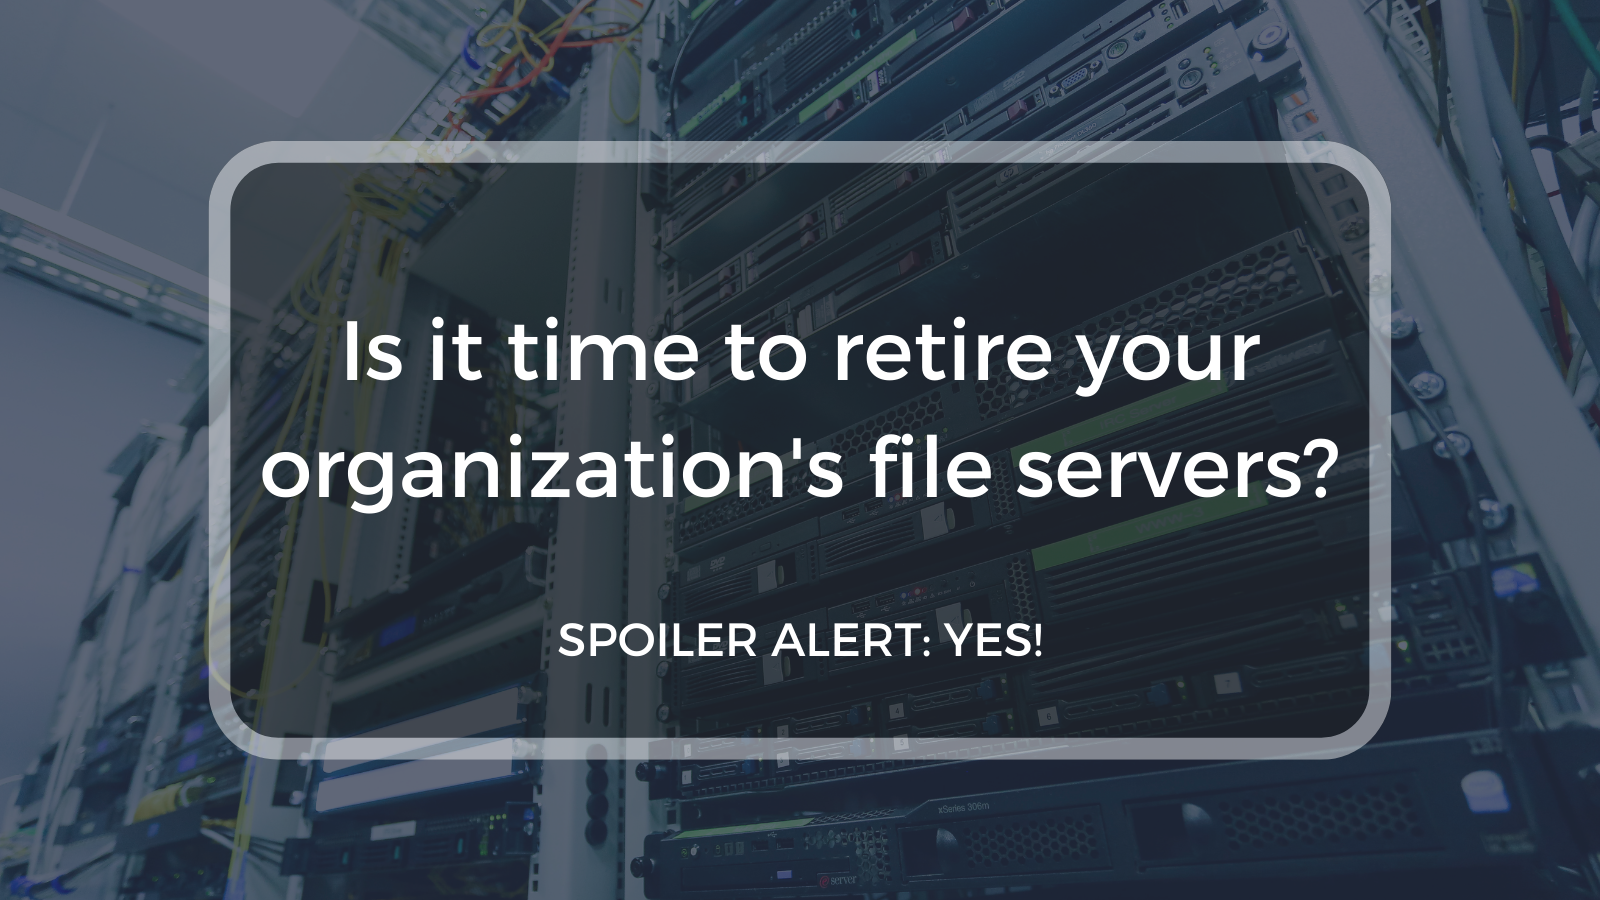 It’s Time to Retire Your File Servers